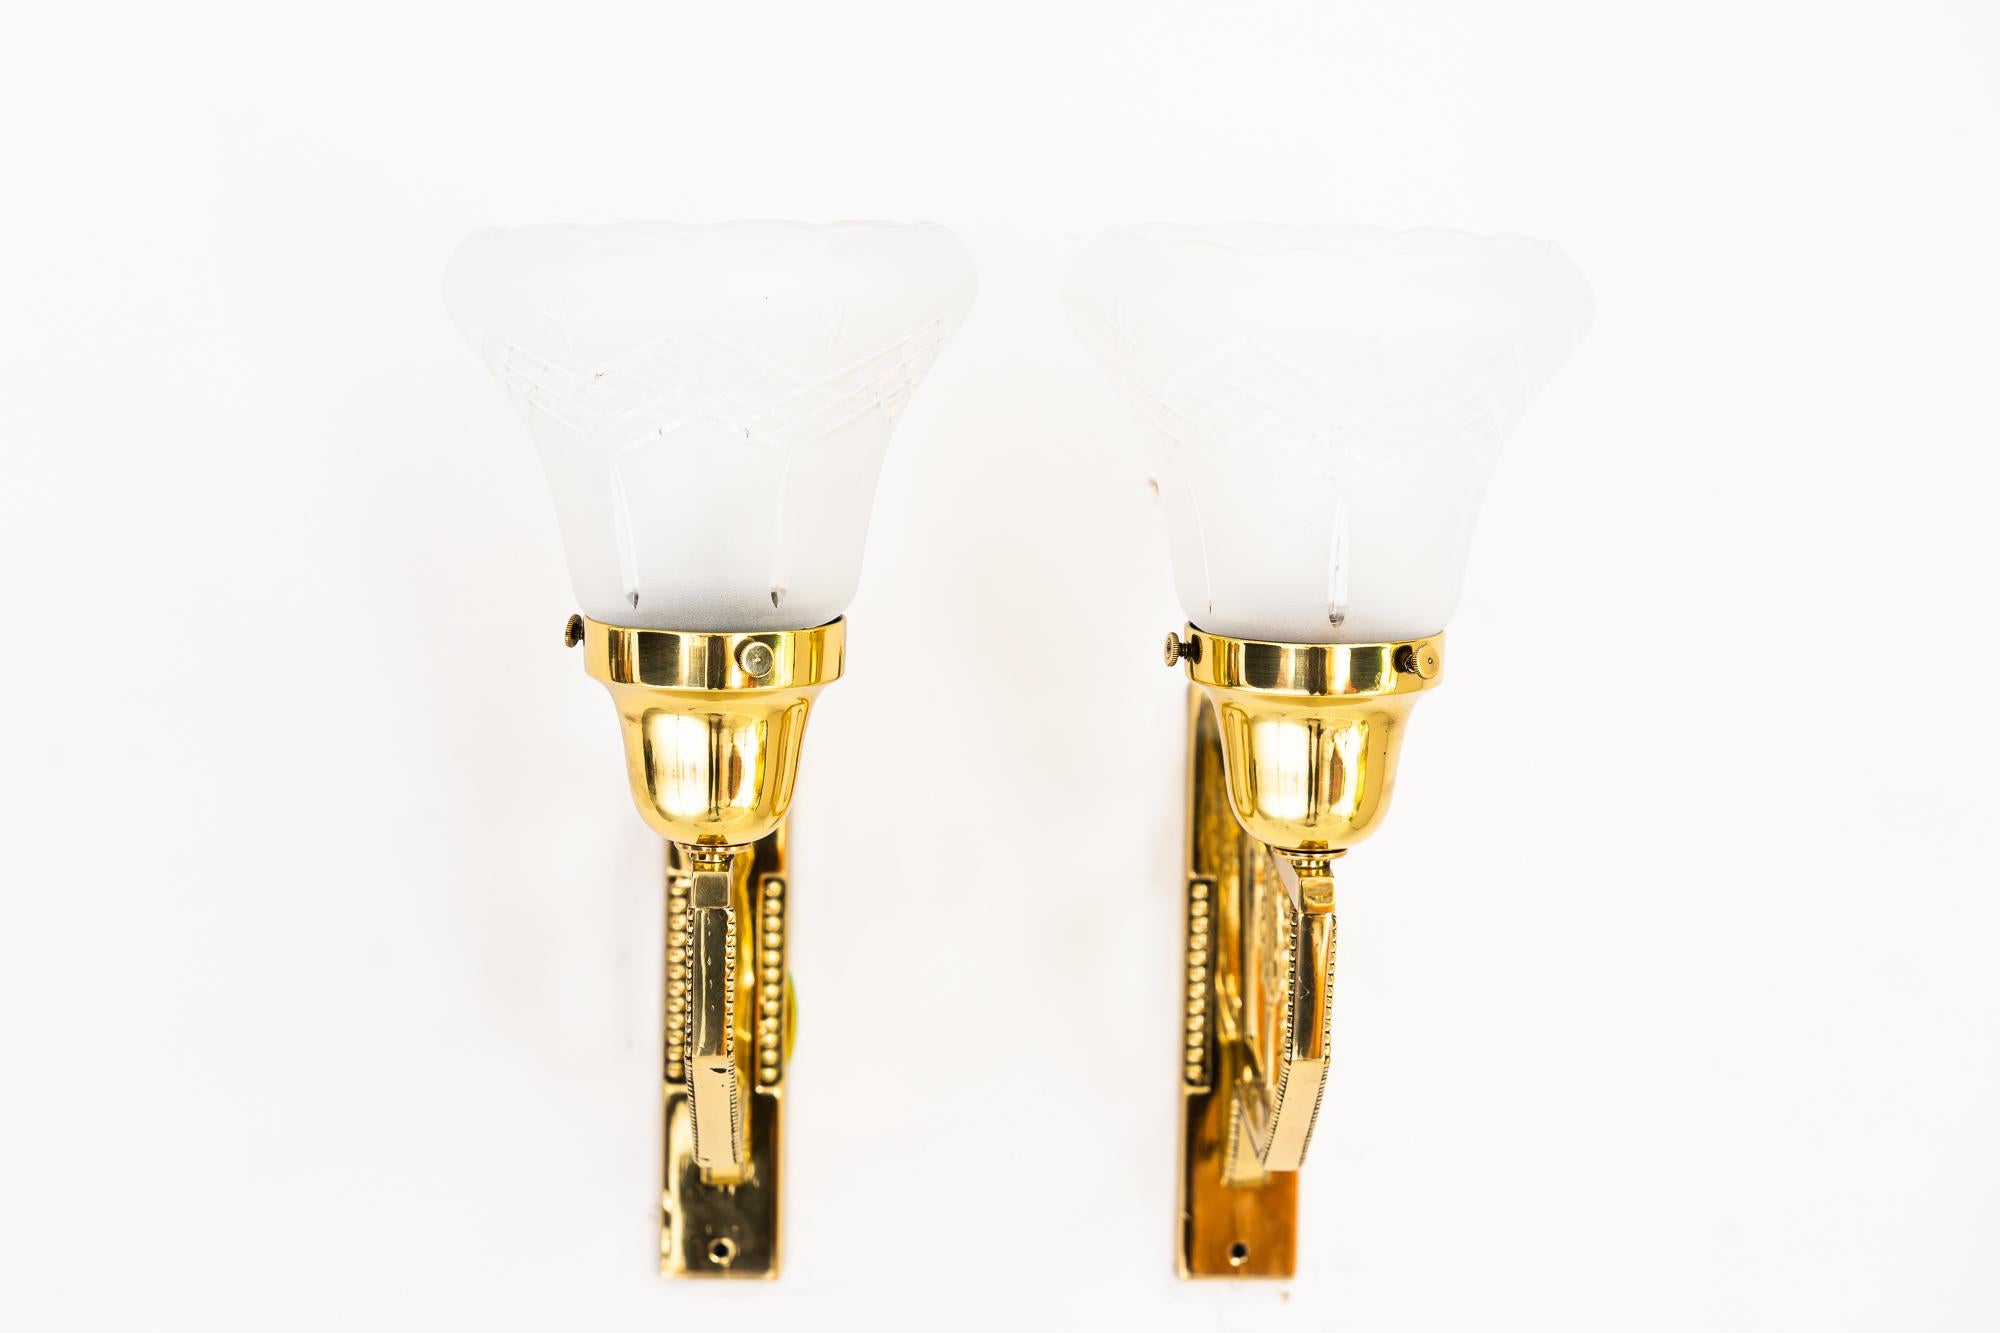 2 Art Deco wall lamps around 1920s
Polished and stove enameled
Original glass shades.